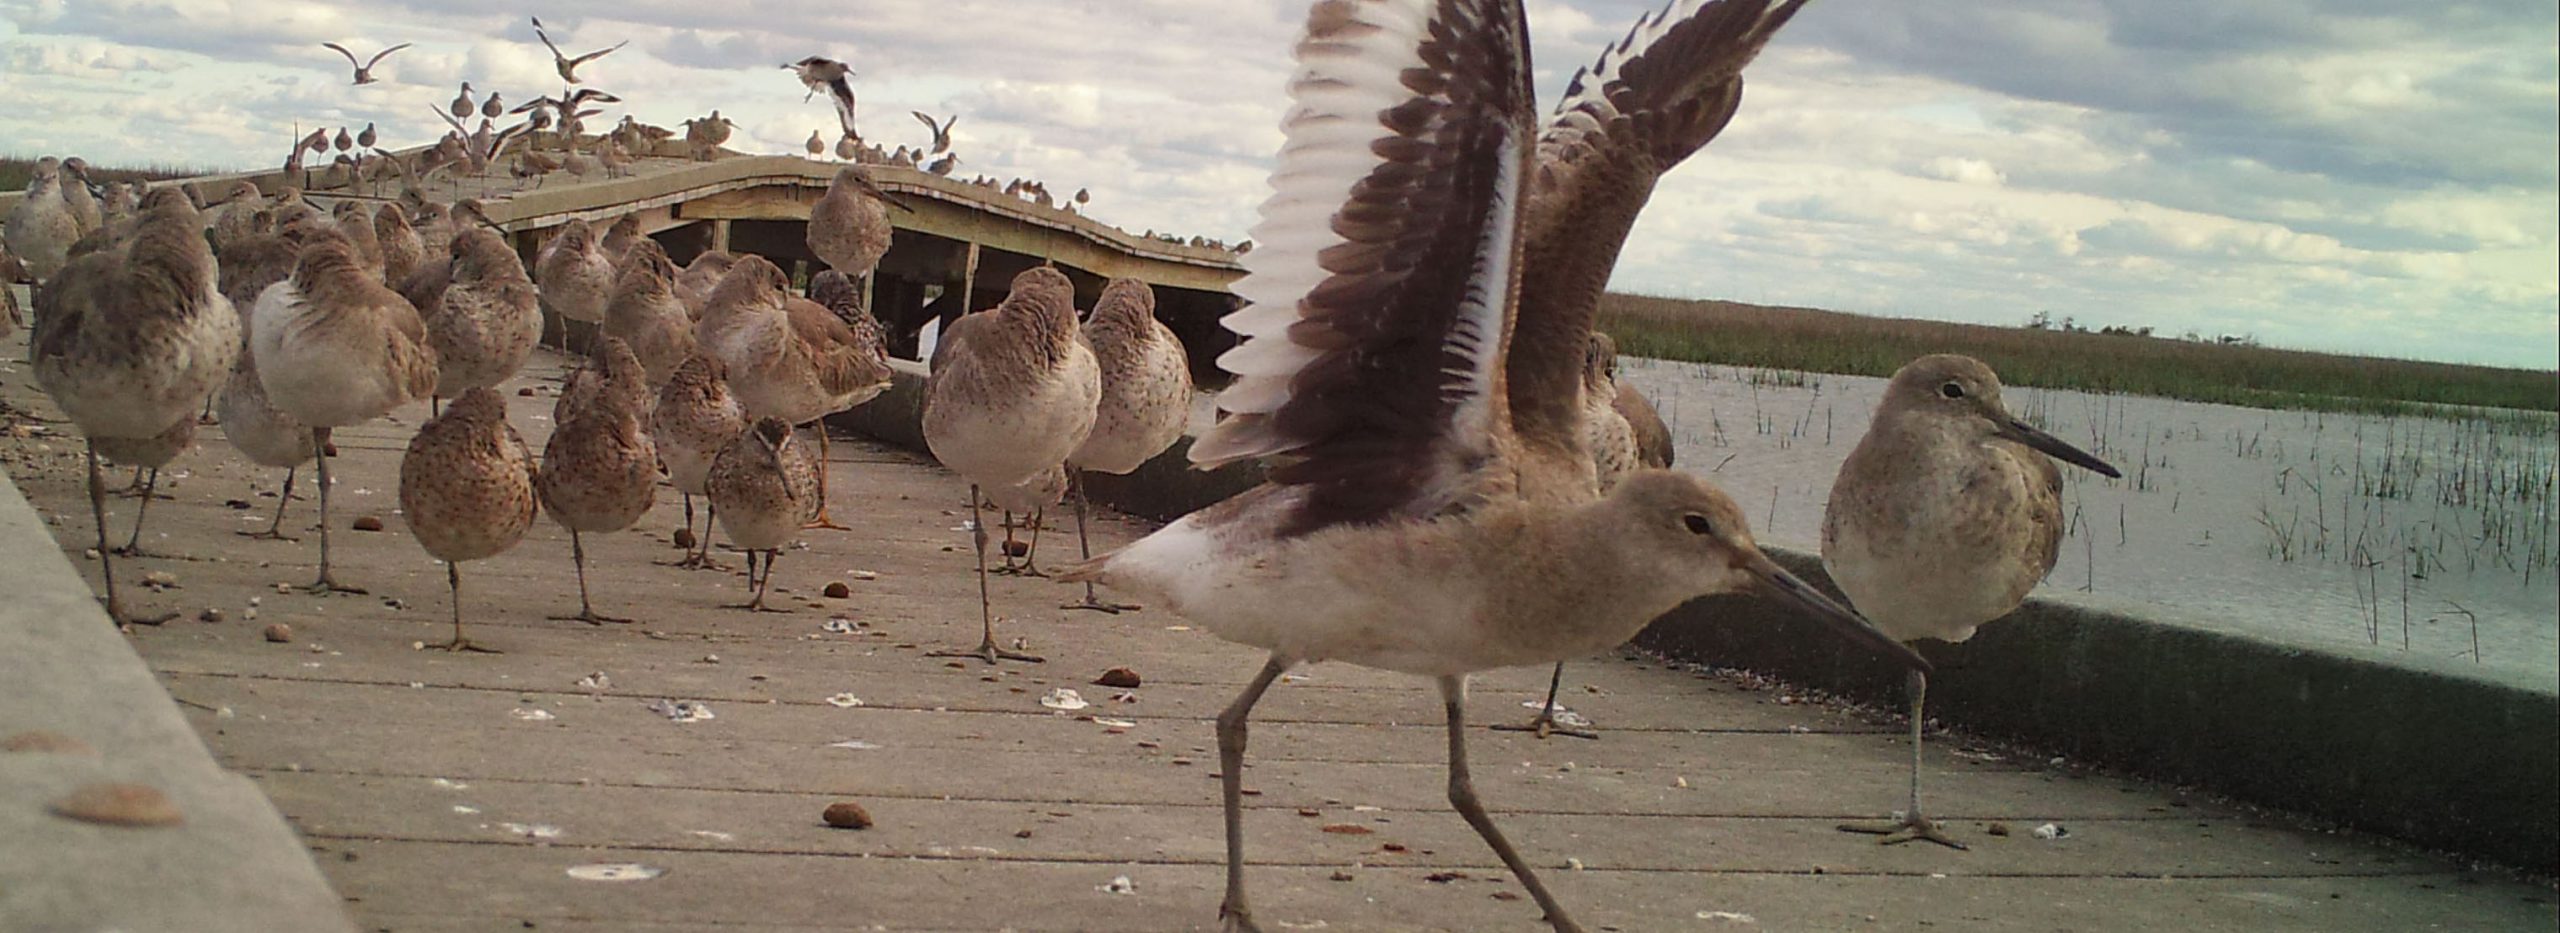 Willet at the education boardwalk